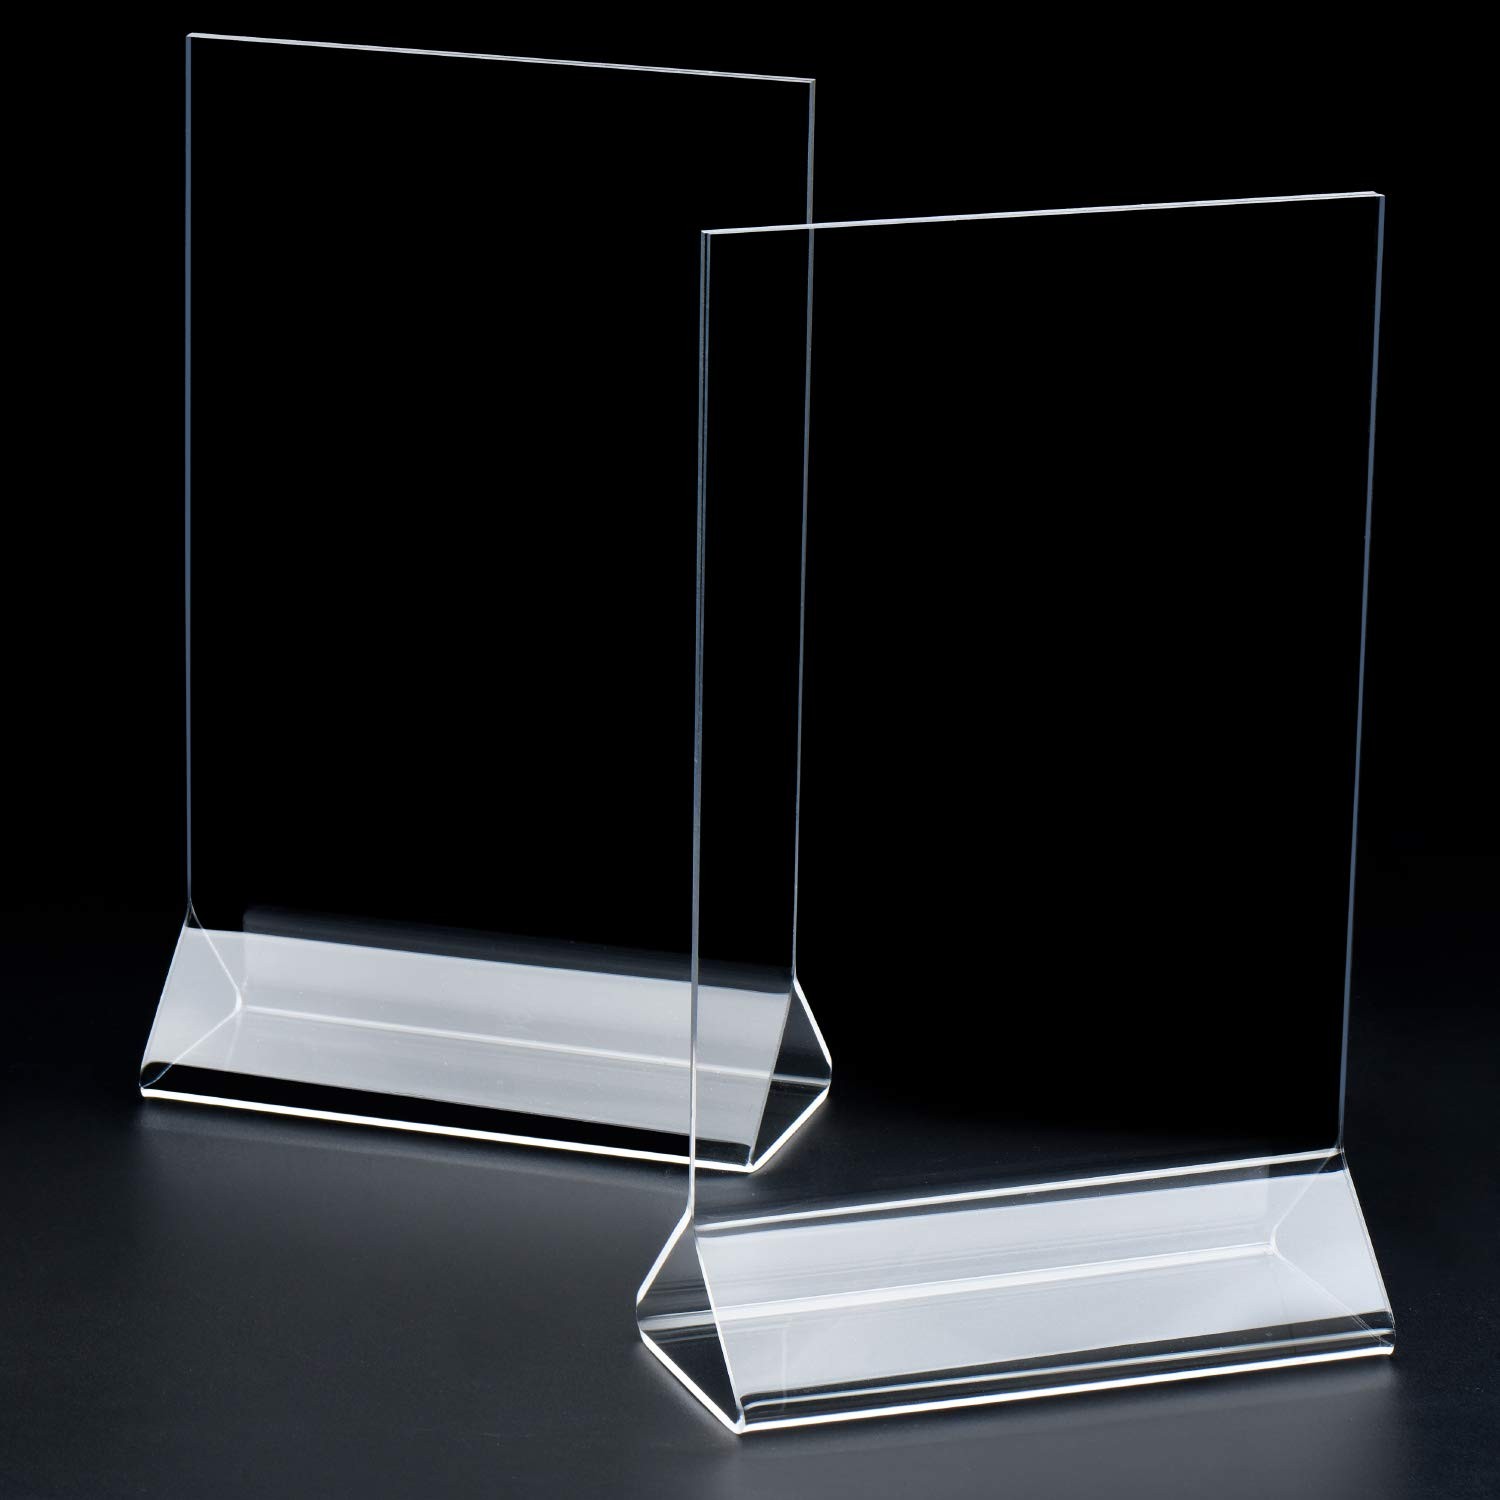 Acrylic Double Sided Table Display Stand Menu Holder 8.5x11 Manufacturers, Acrylic Double Sided Table Display Stand Menu Holder 8.5x11 Factory, Supply Acrylic Double Sided Table Display Stand Menu Holder 8.5x11